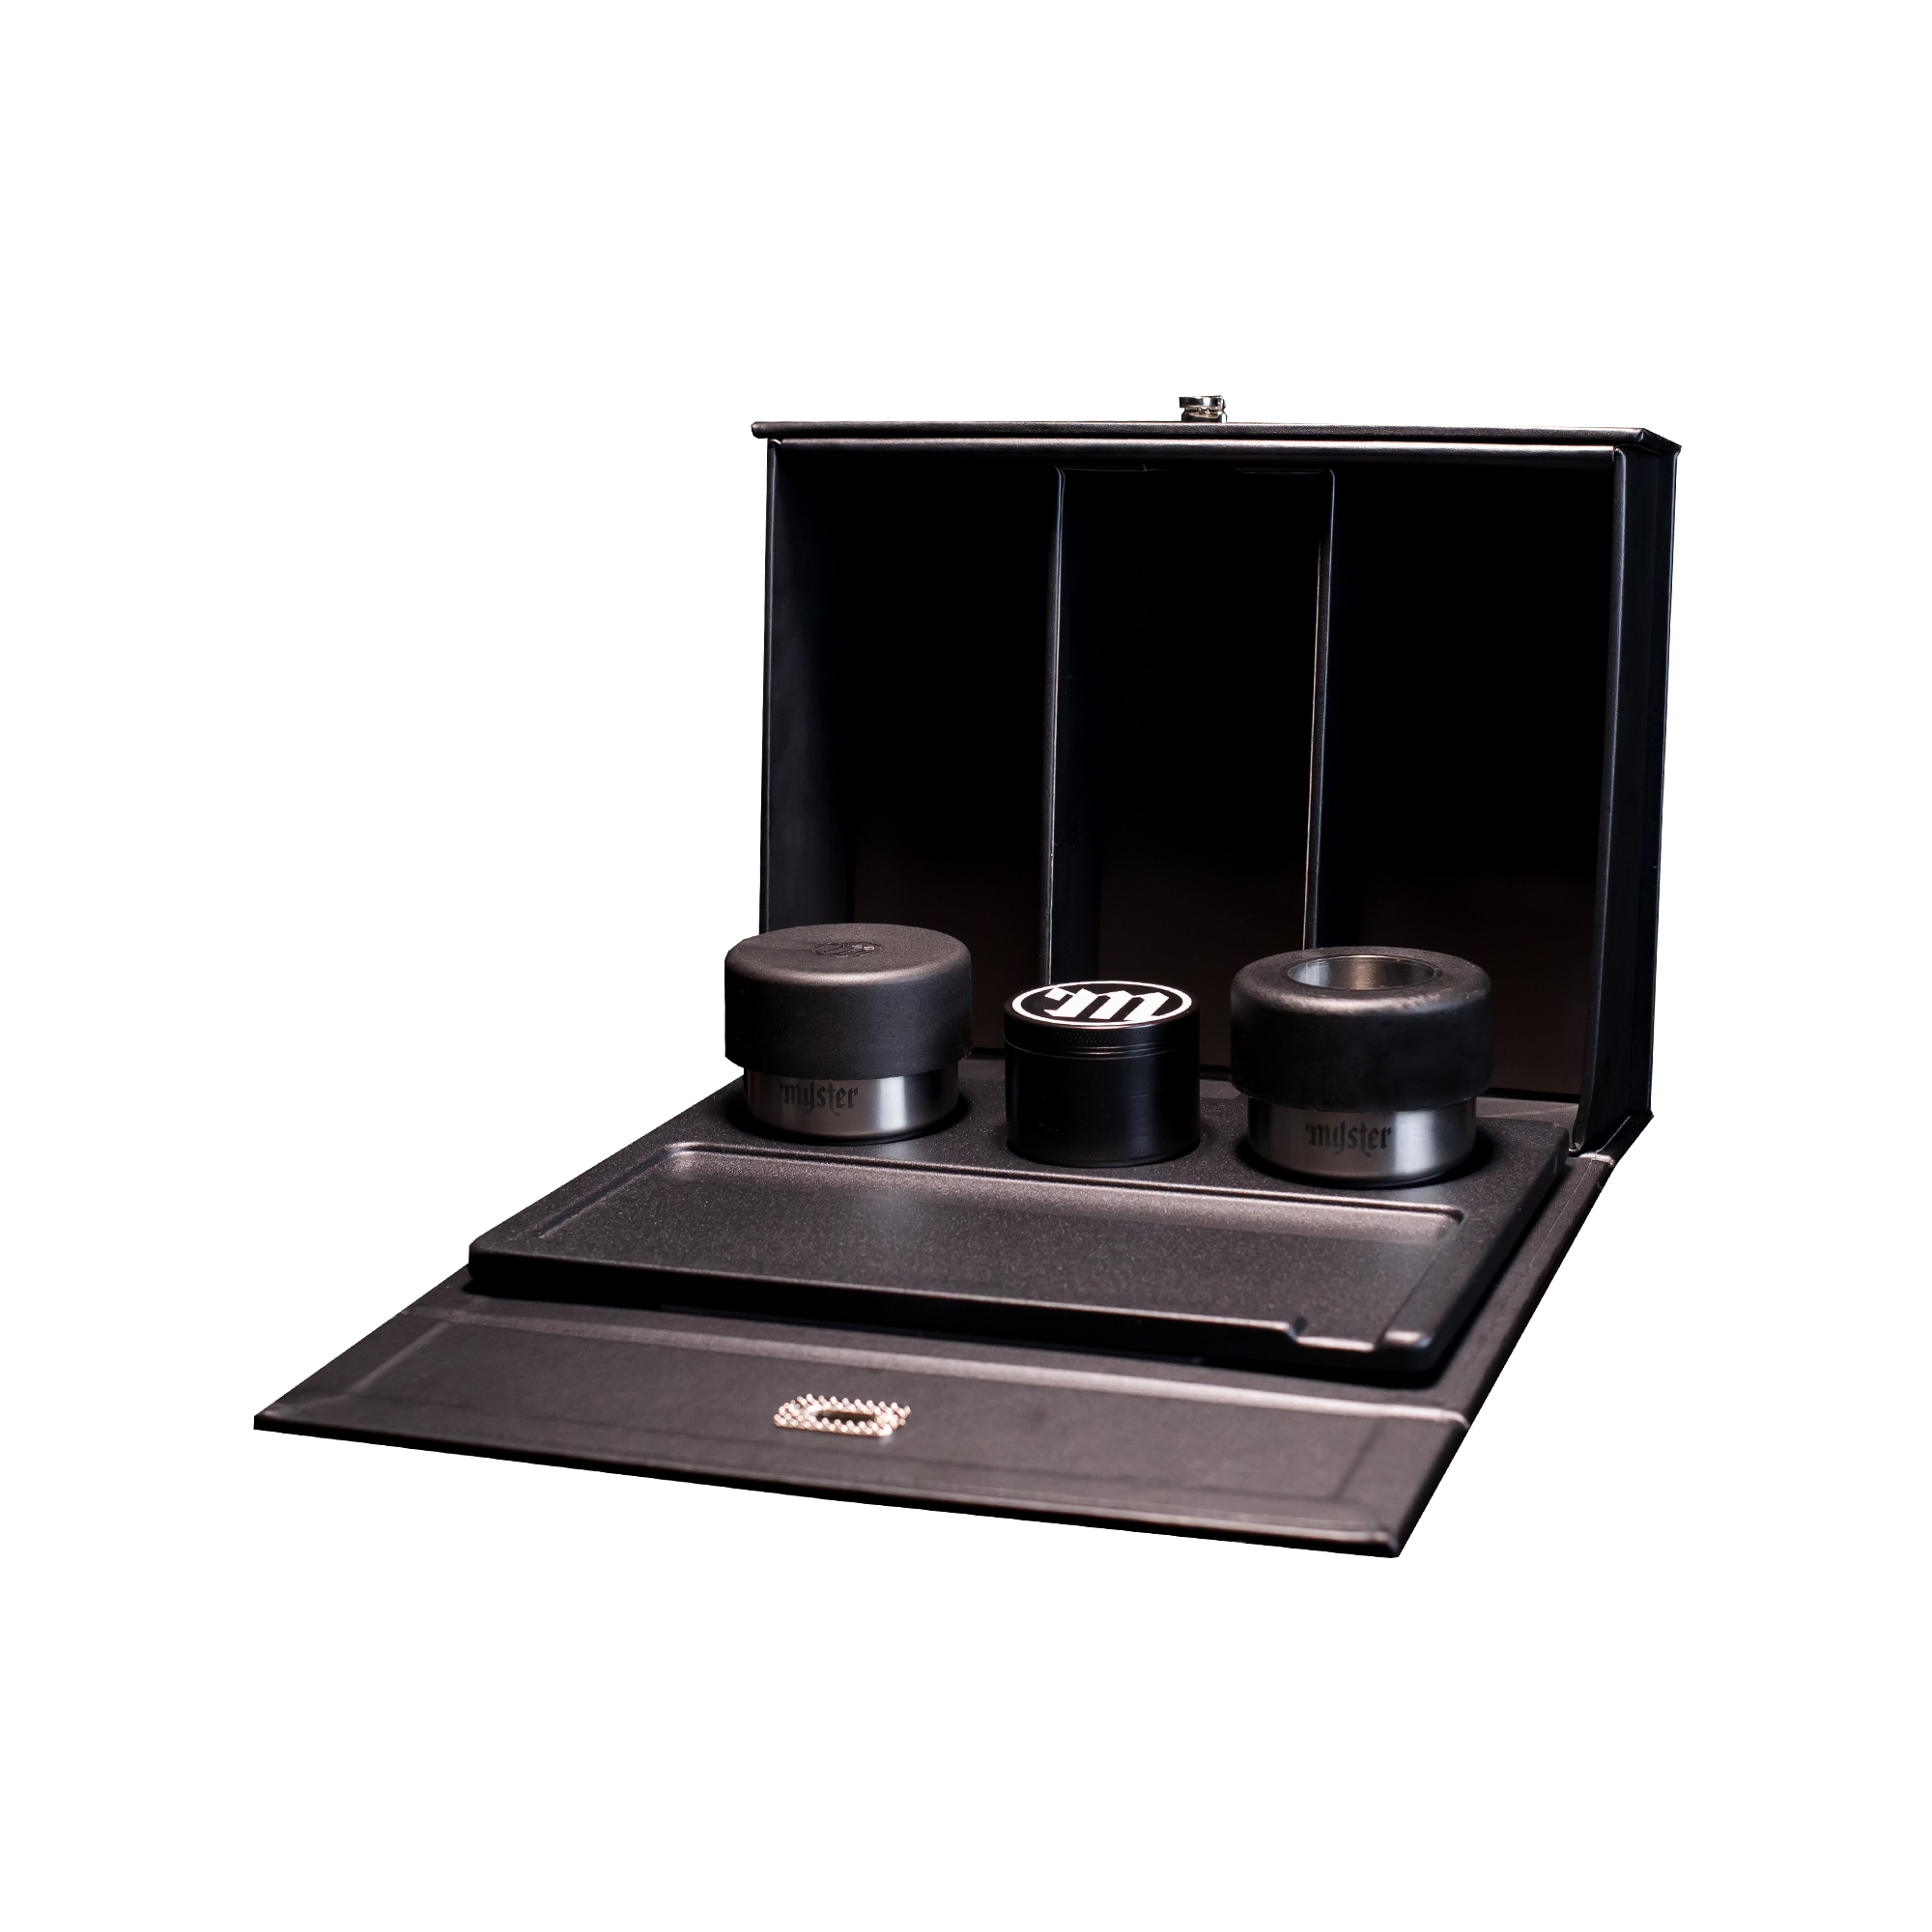 Limited Edition Blacked Out Stashtray (ONLINE ONLY)